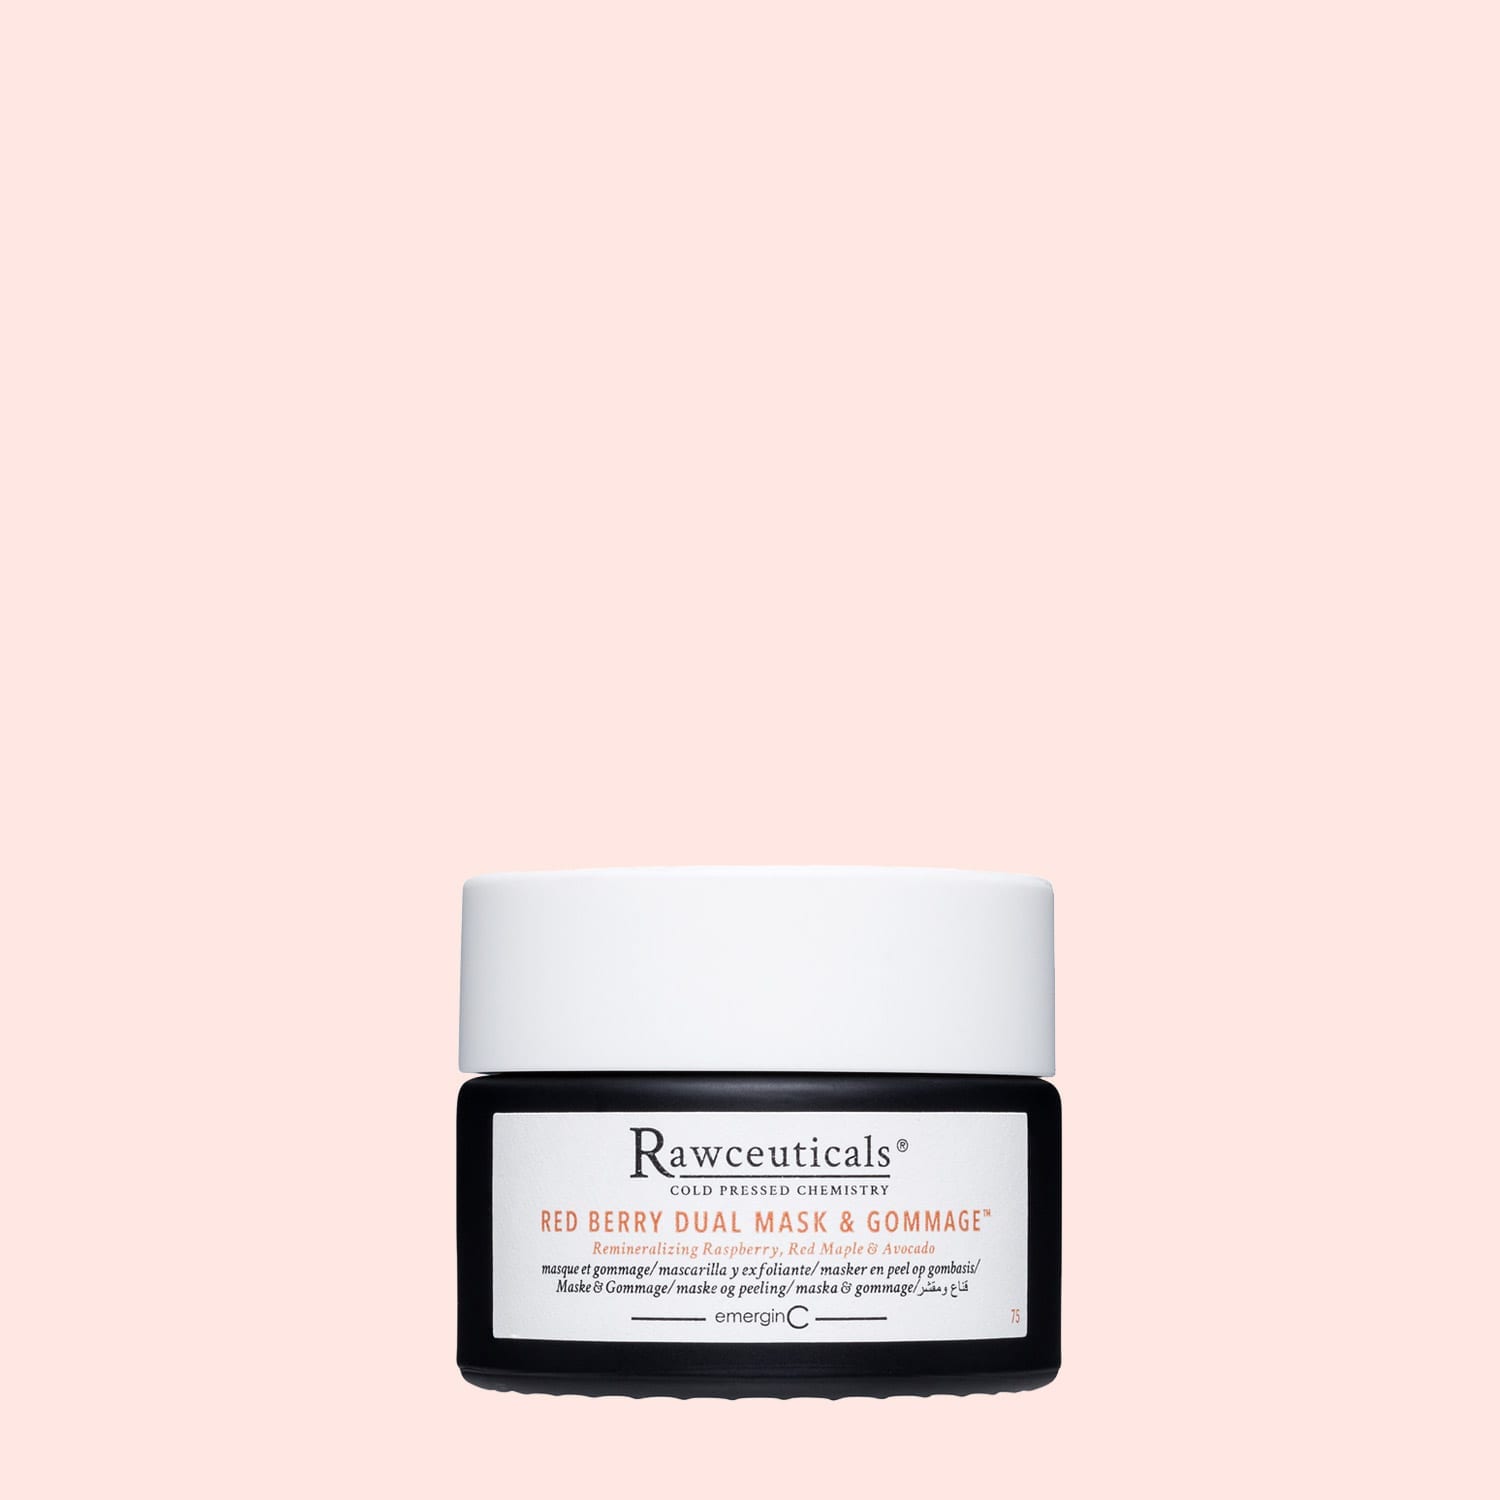 Rawceuticals® RED BERRY DUAL MASK & GOMMAGE